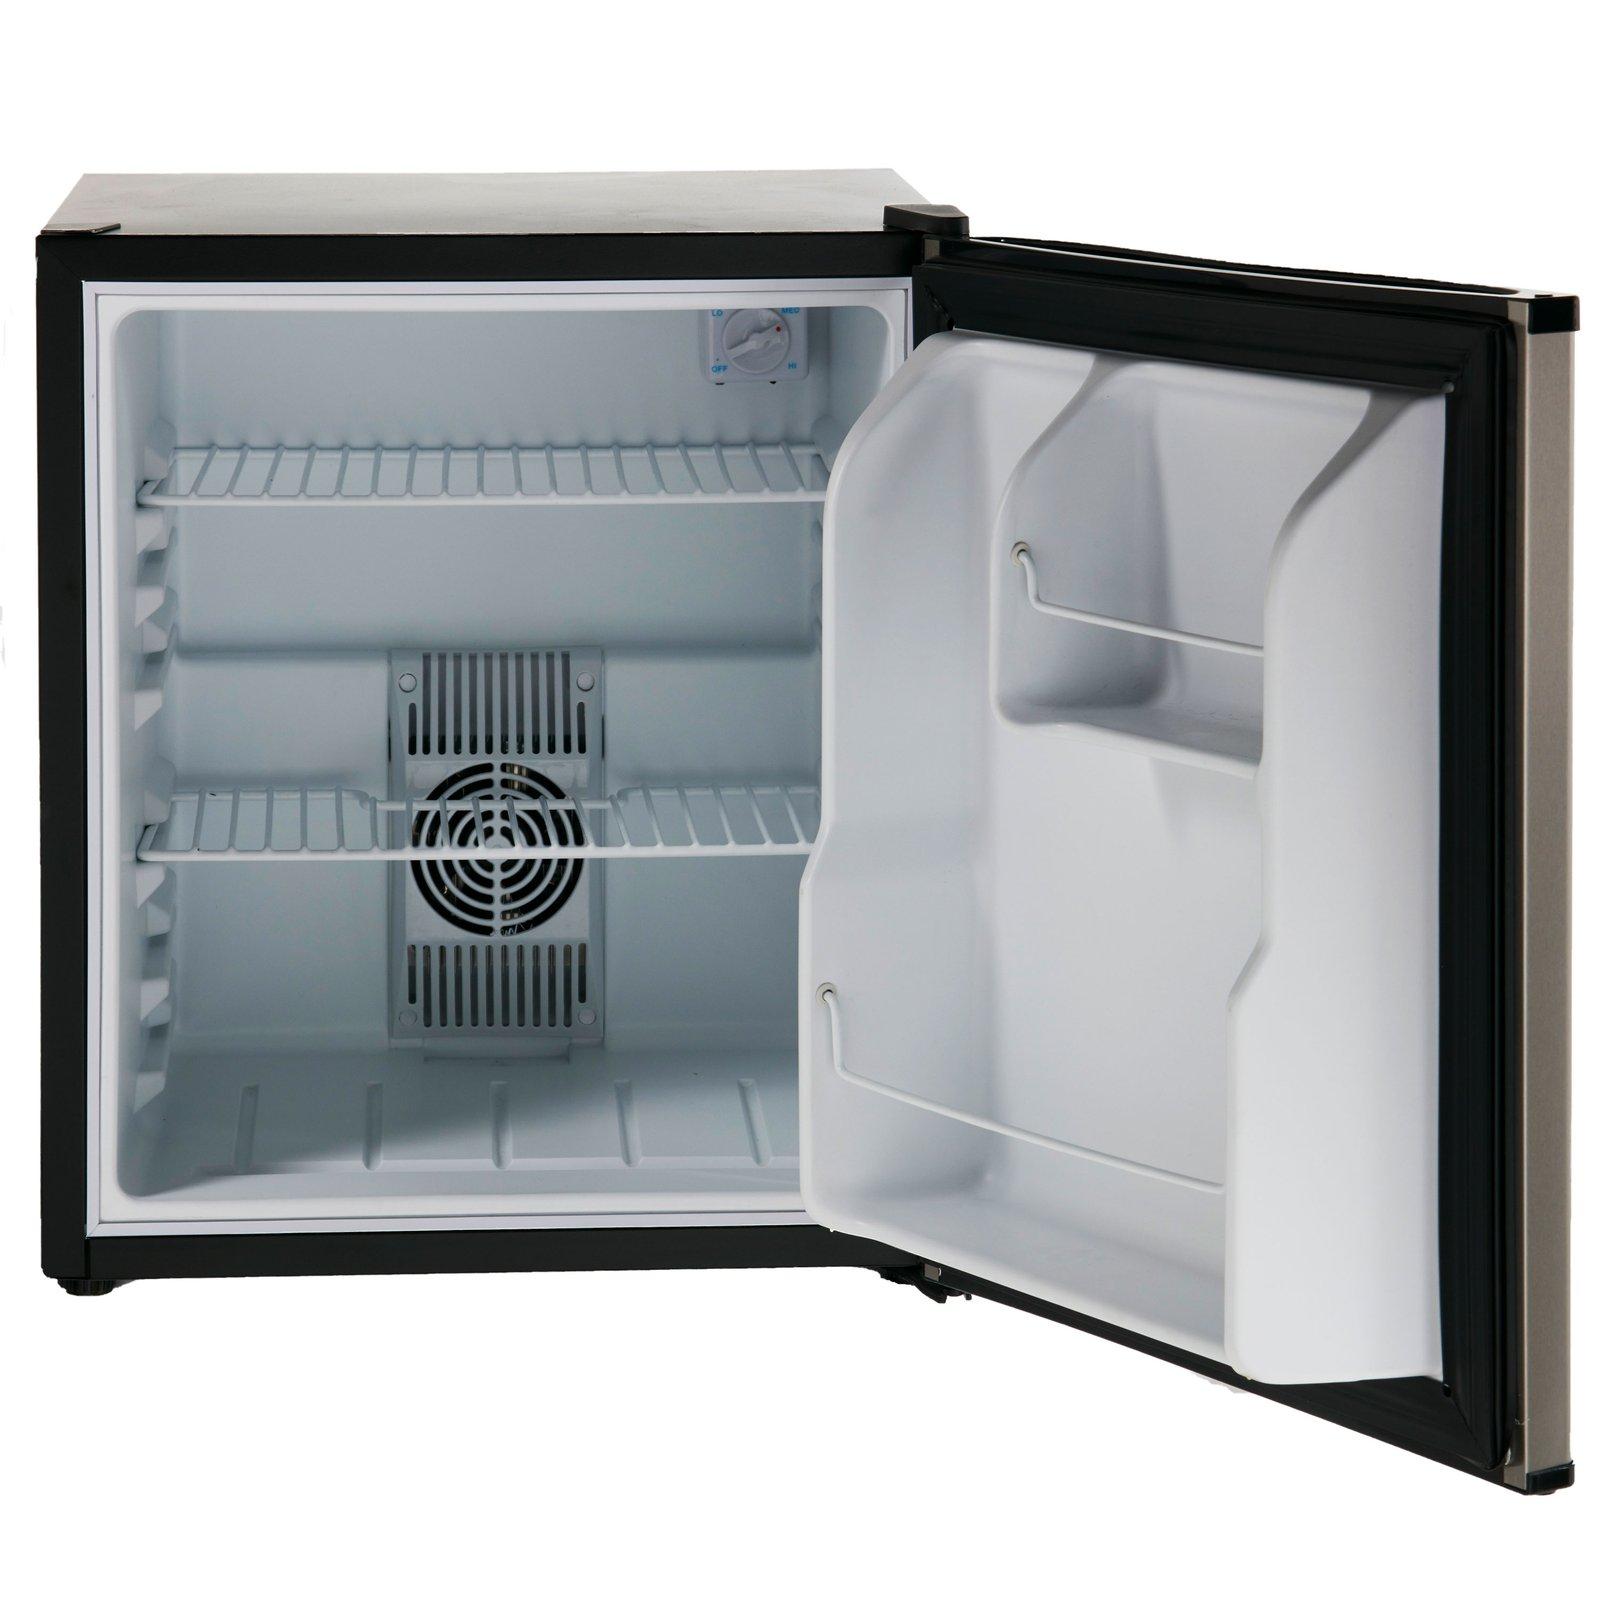 Avanti 1.7 cu. ft. Portable Superconductor All Refrigerator - Stainless Steel with Black Cabinet / 1.7 cu. ft.